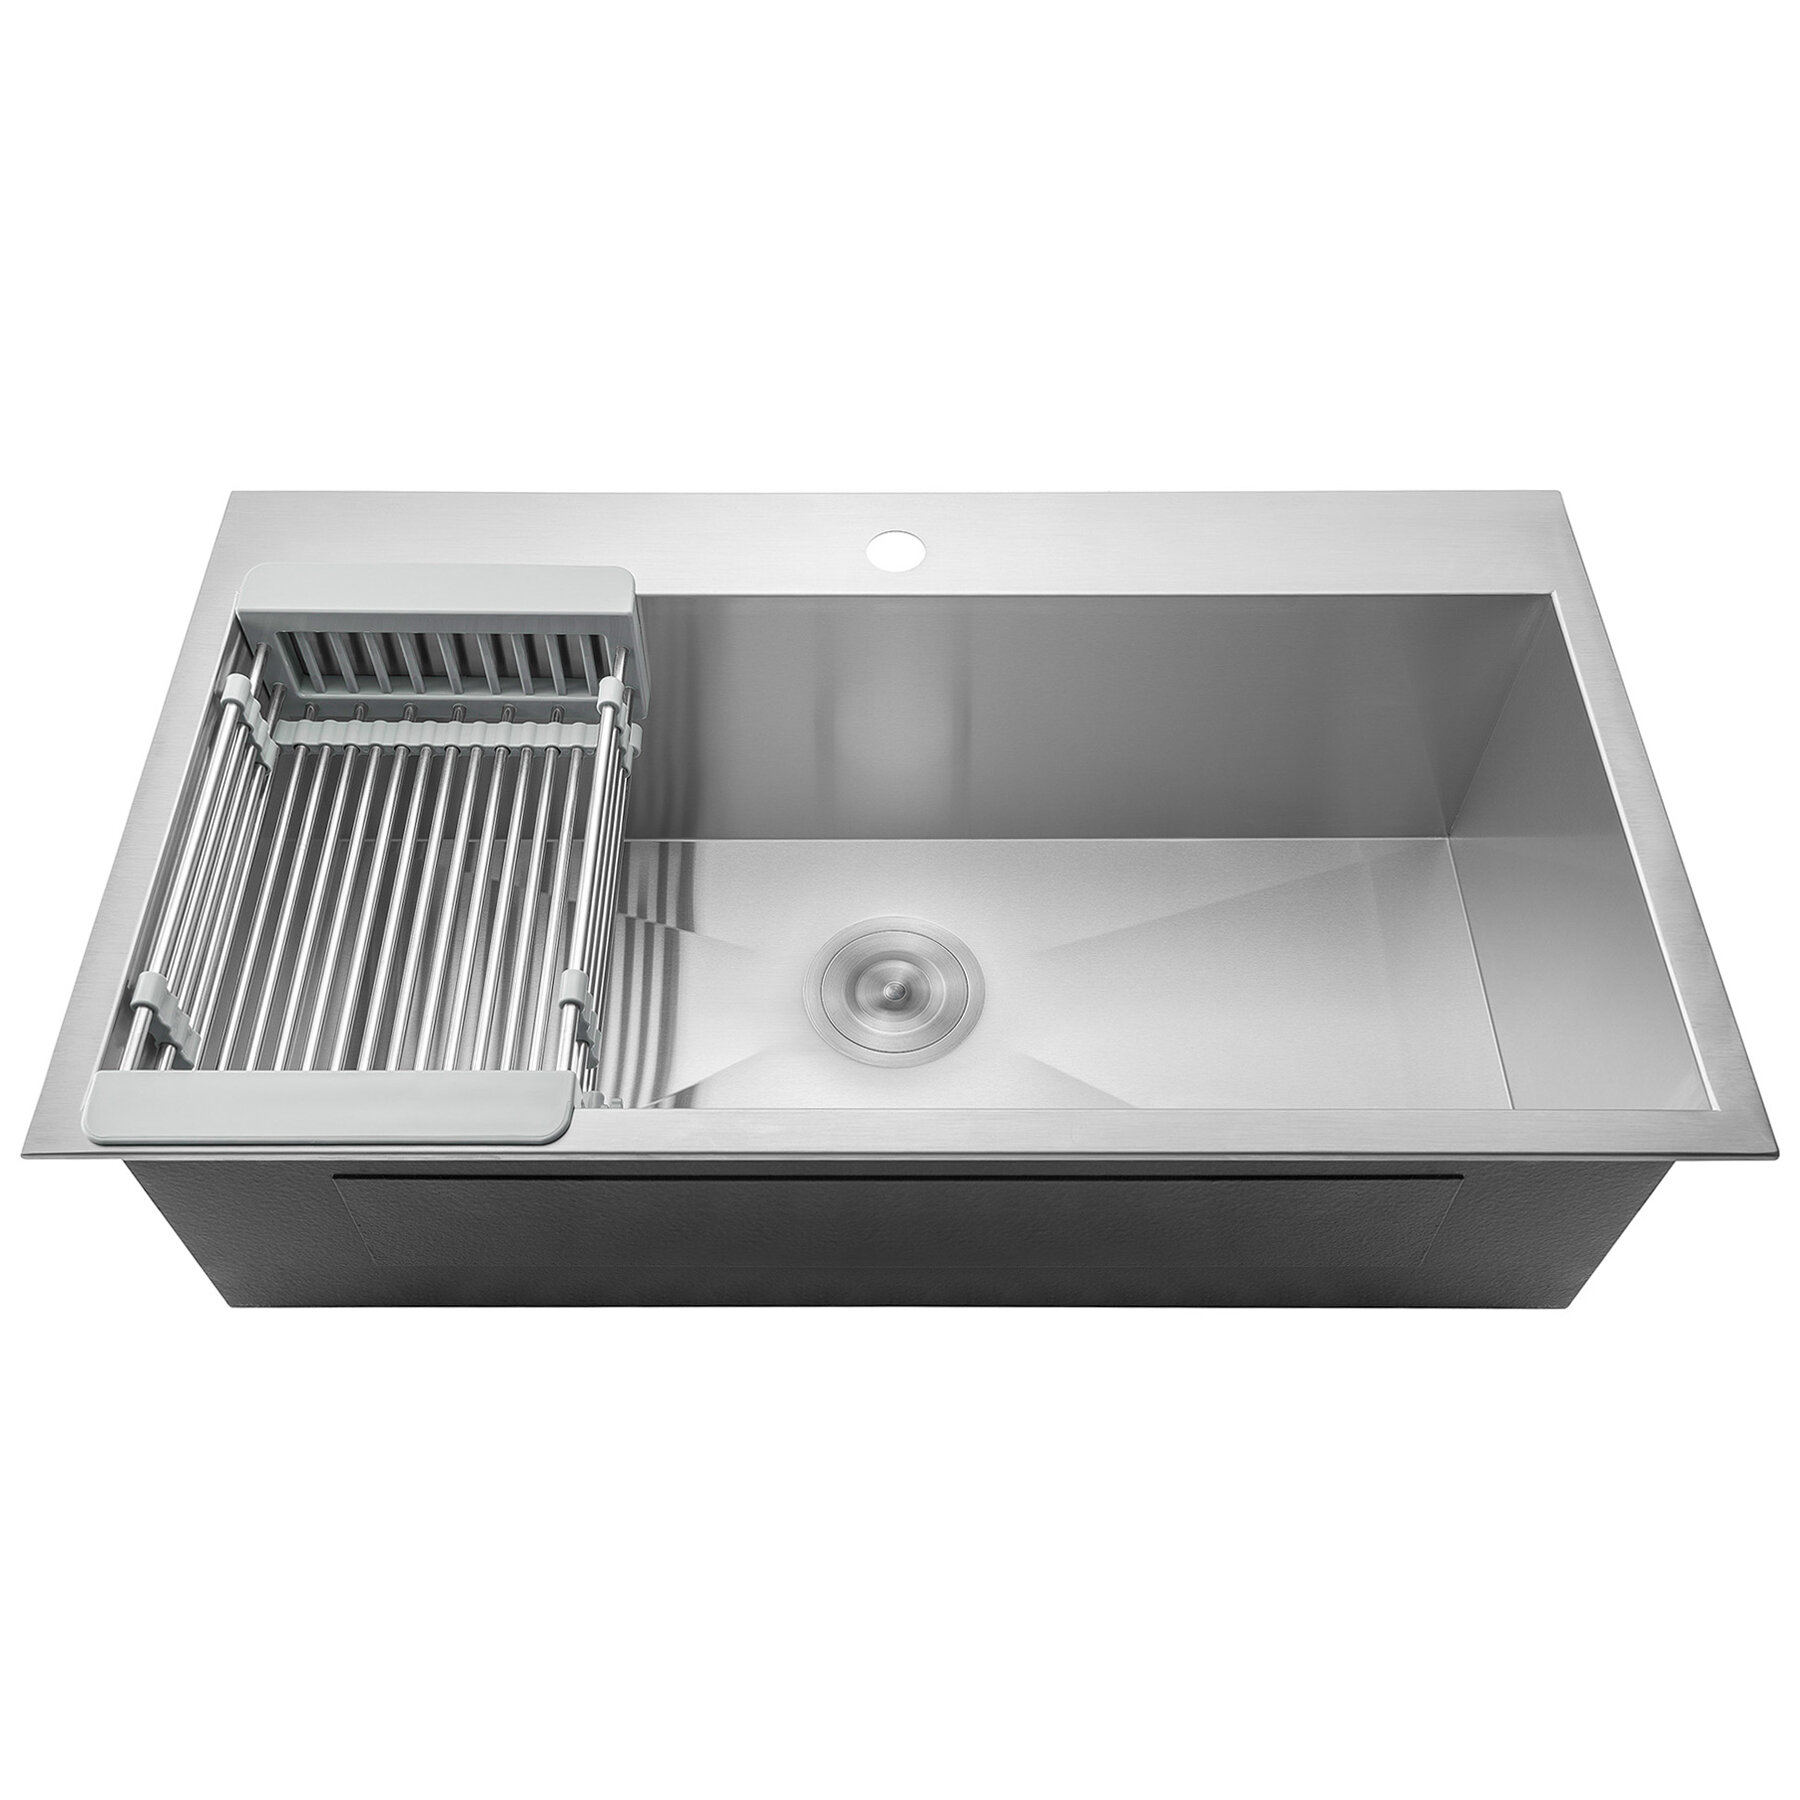 33 L X 22 W Drop In Kitchen Sink With Adjustable Tray And Drain Strainer Kit